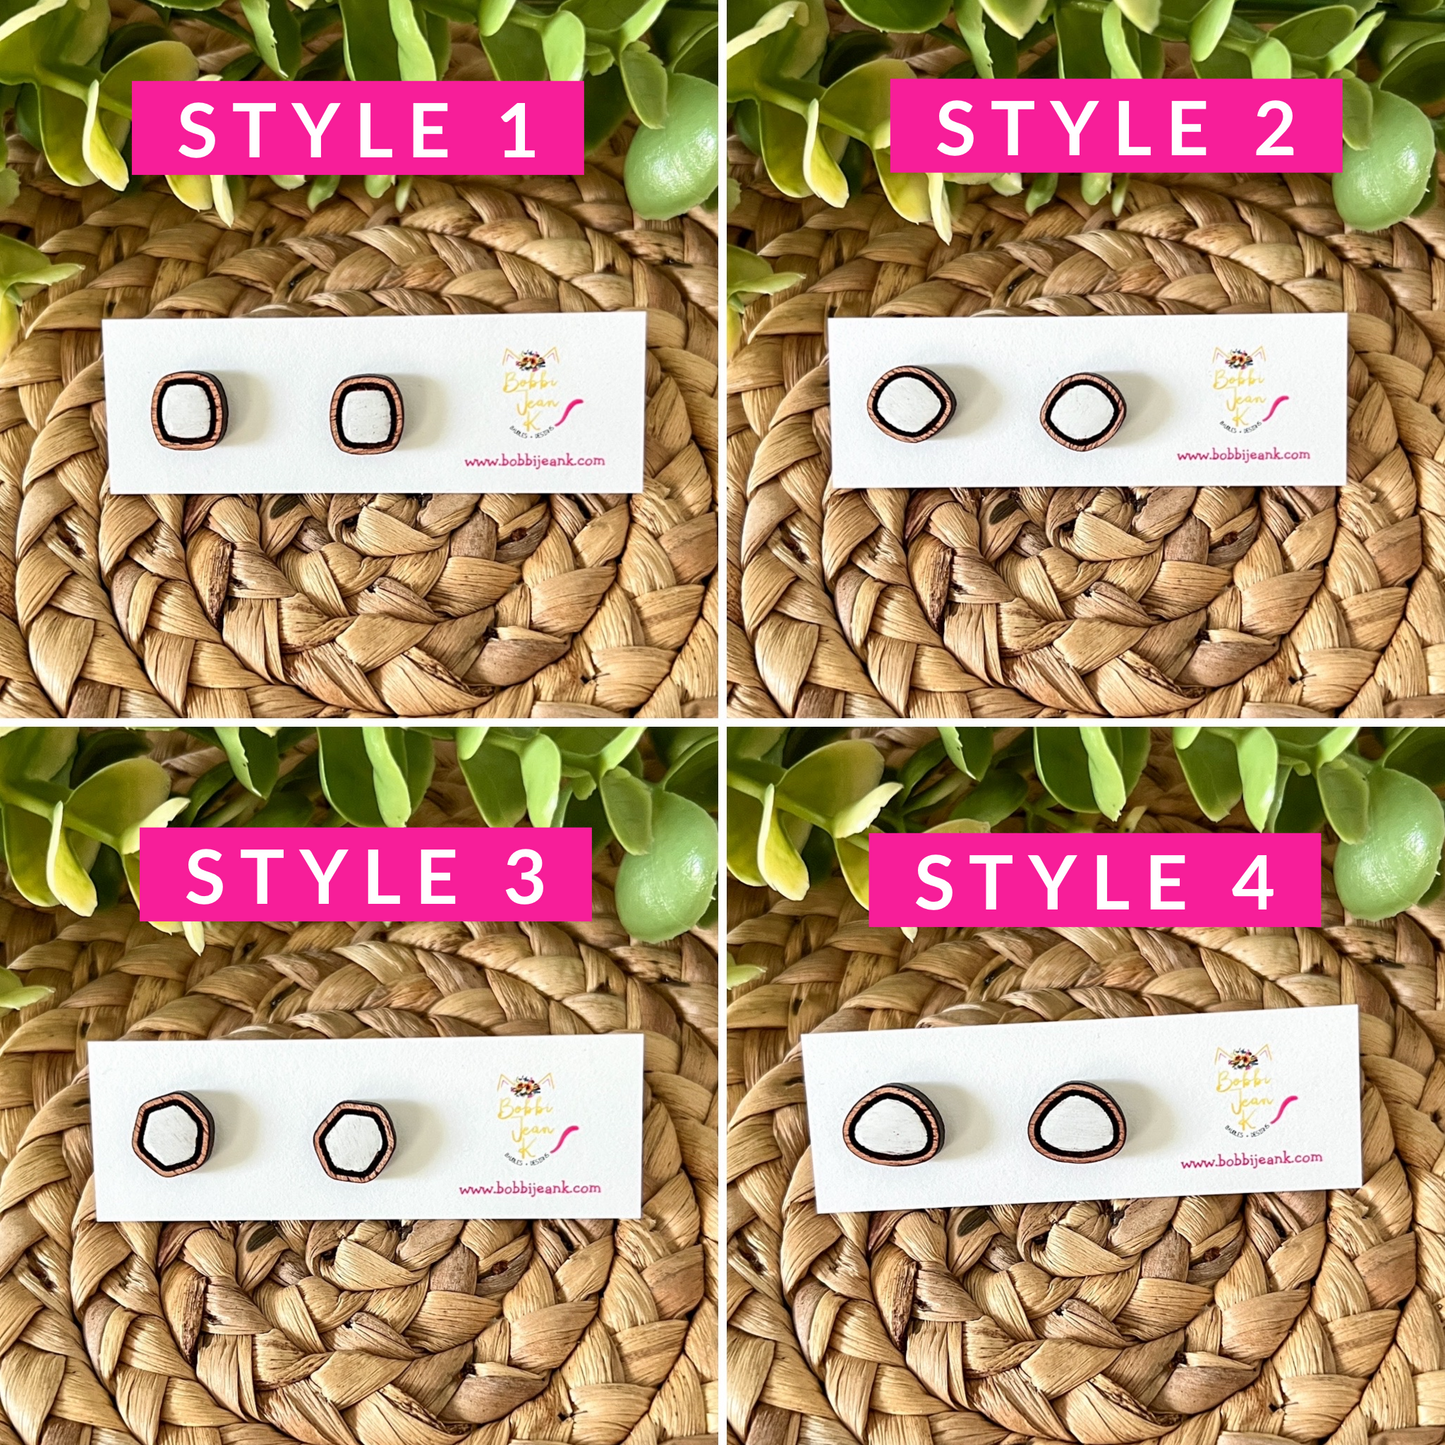 White Hand Painted & Resined Wood Studs: Choose from 4 Styles